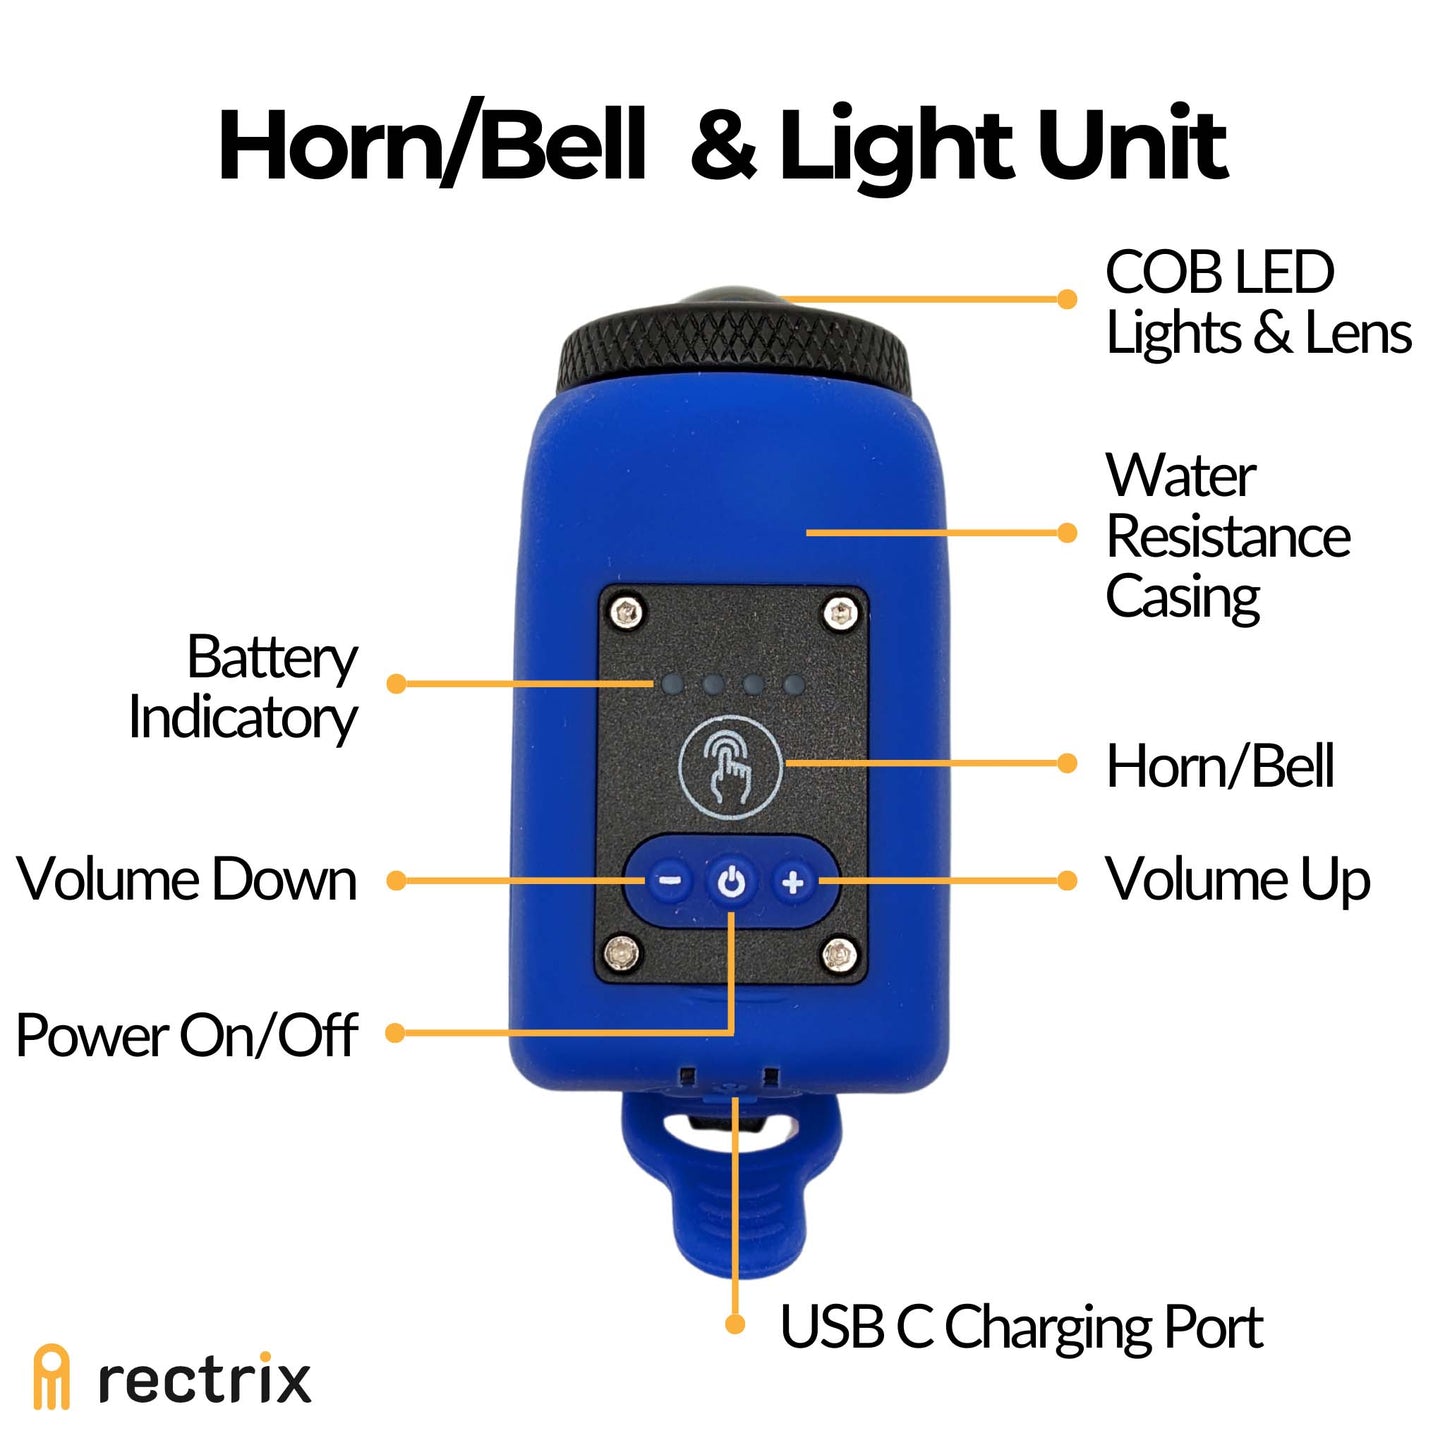 Close-up view of the product's main unit housing the light, horn, battery indicator, power button, and volume control